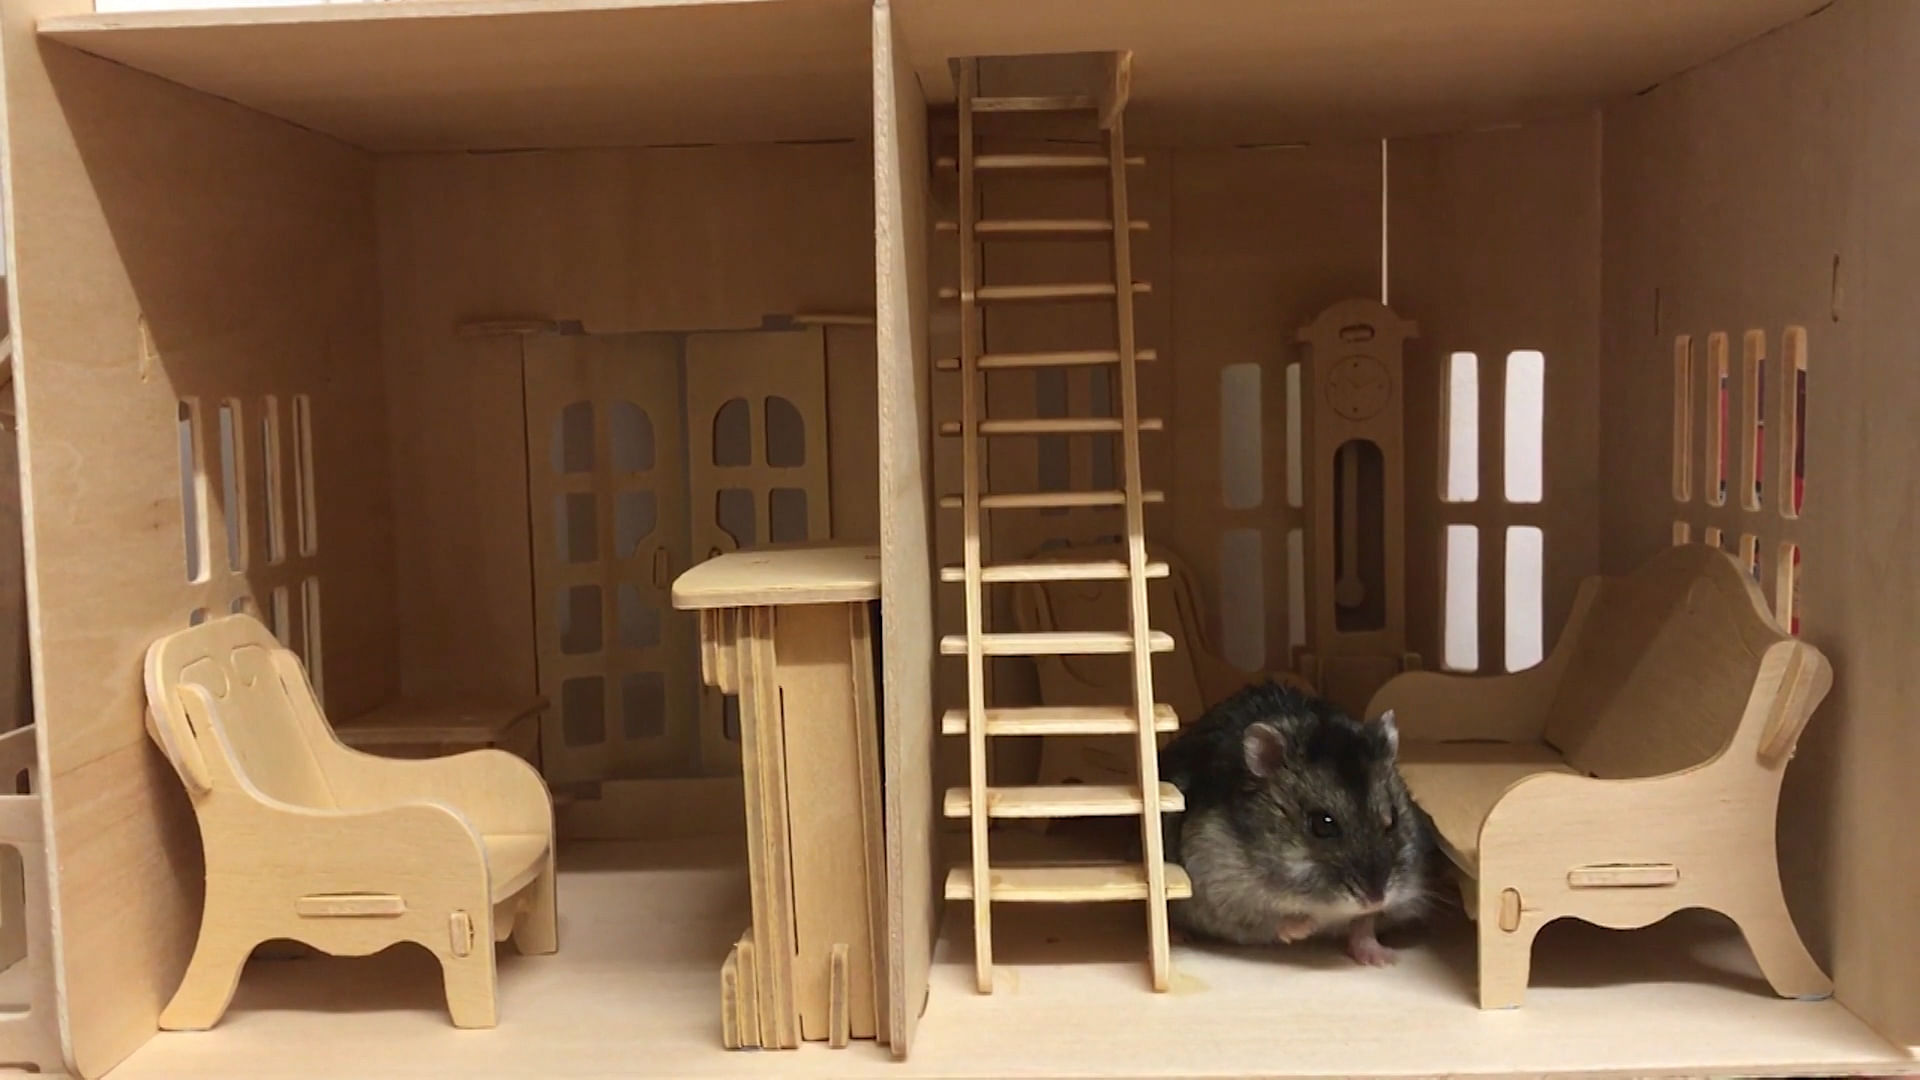 Cheese, the hamster in her house (Photo: AP screengrab)